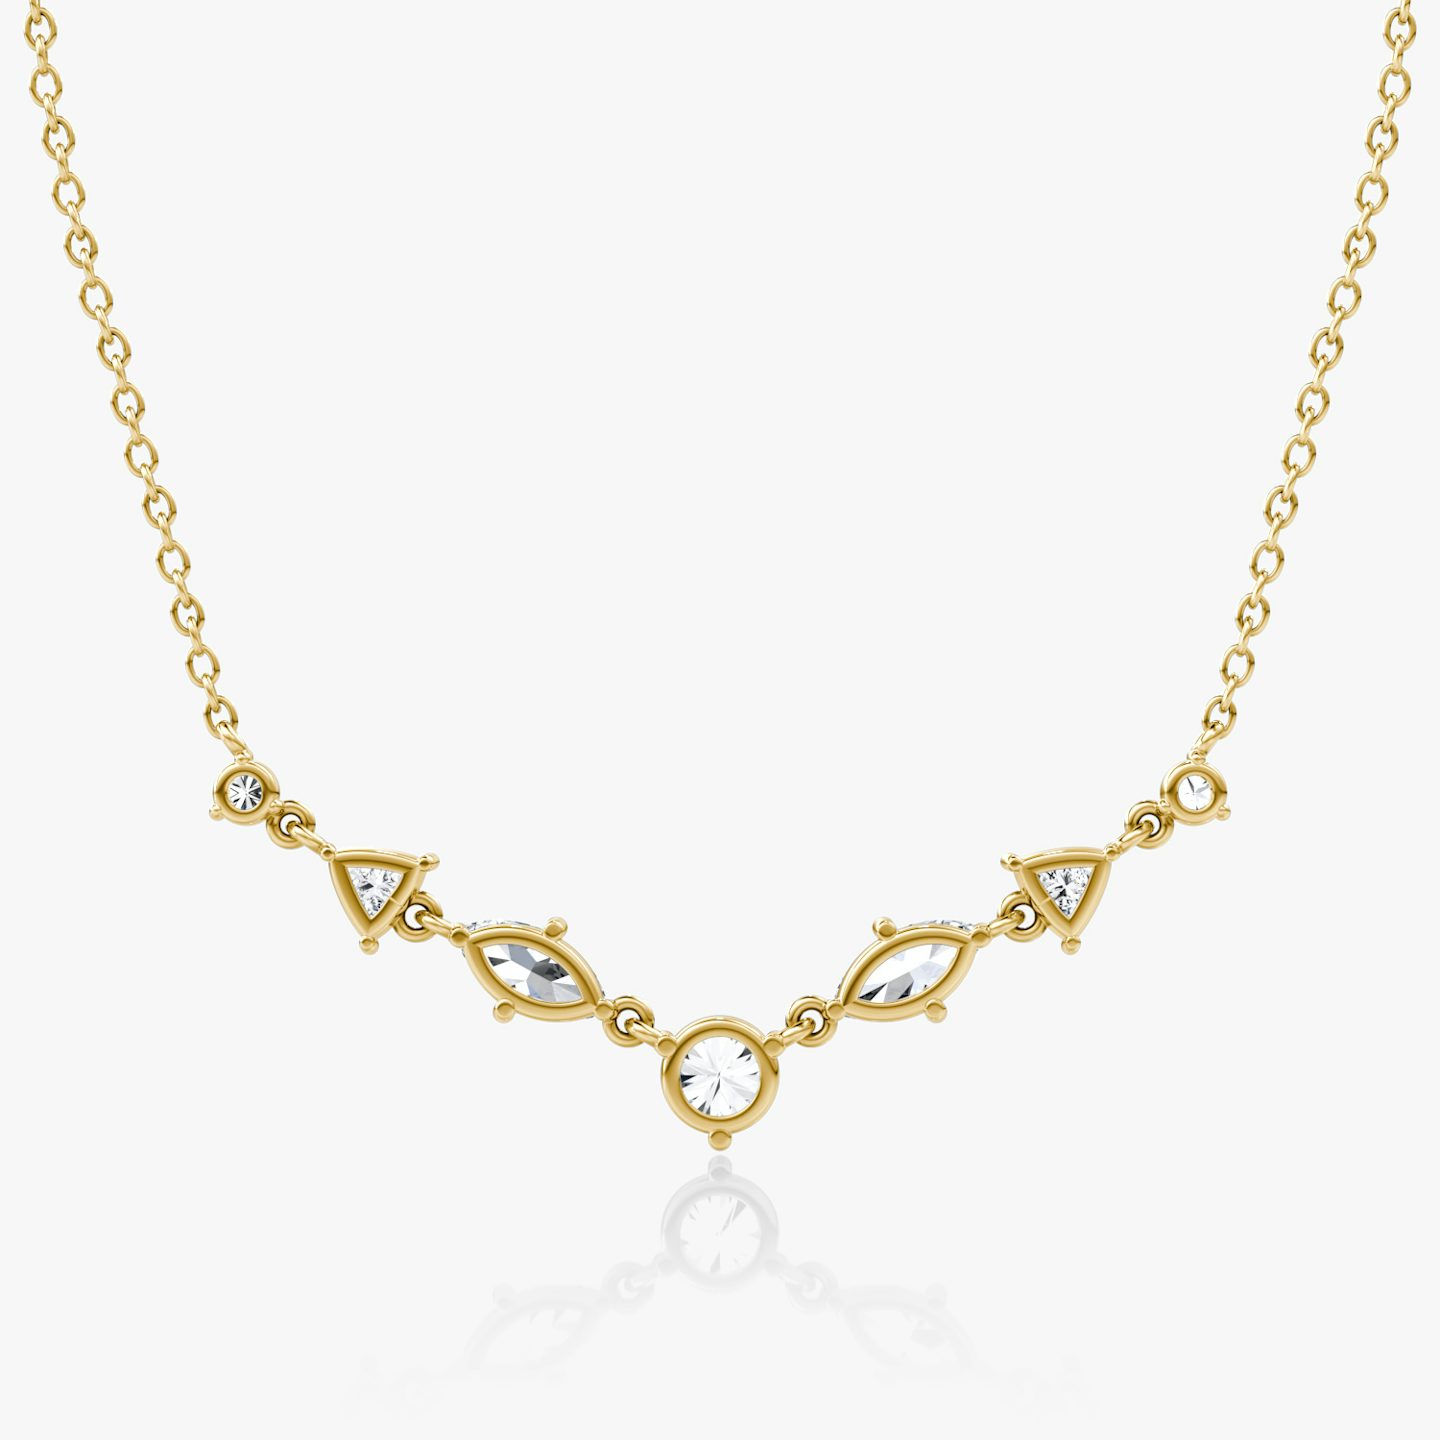 Mixed Shape Linked Tennis Necklace | 14k | Yellow Gold | diamondtype: round-brilliant+marquise+trillion | chainLength: 16-18